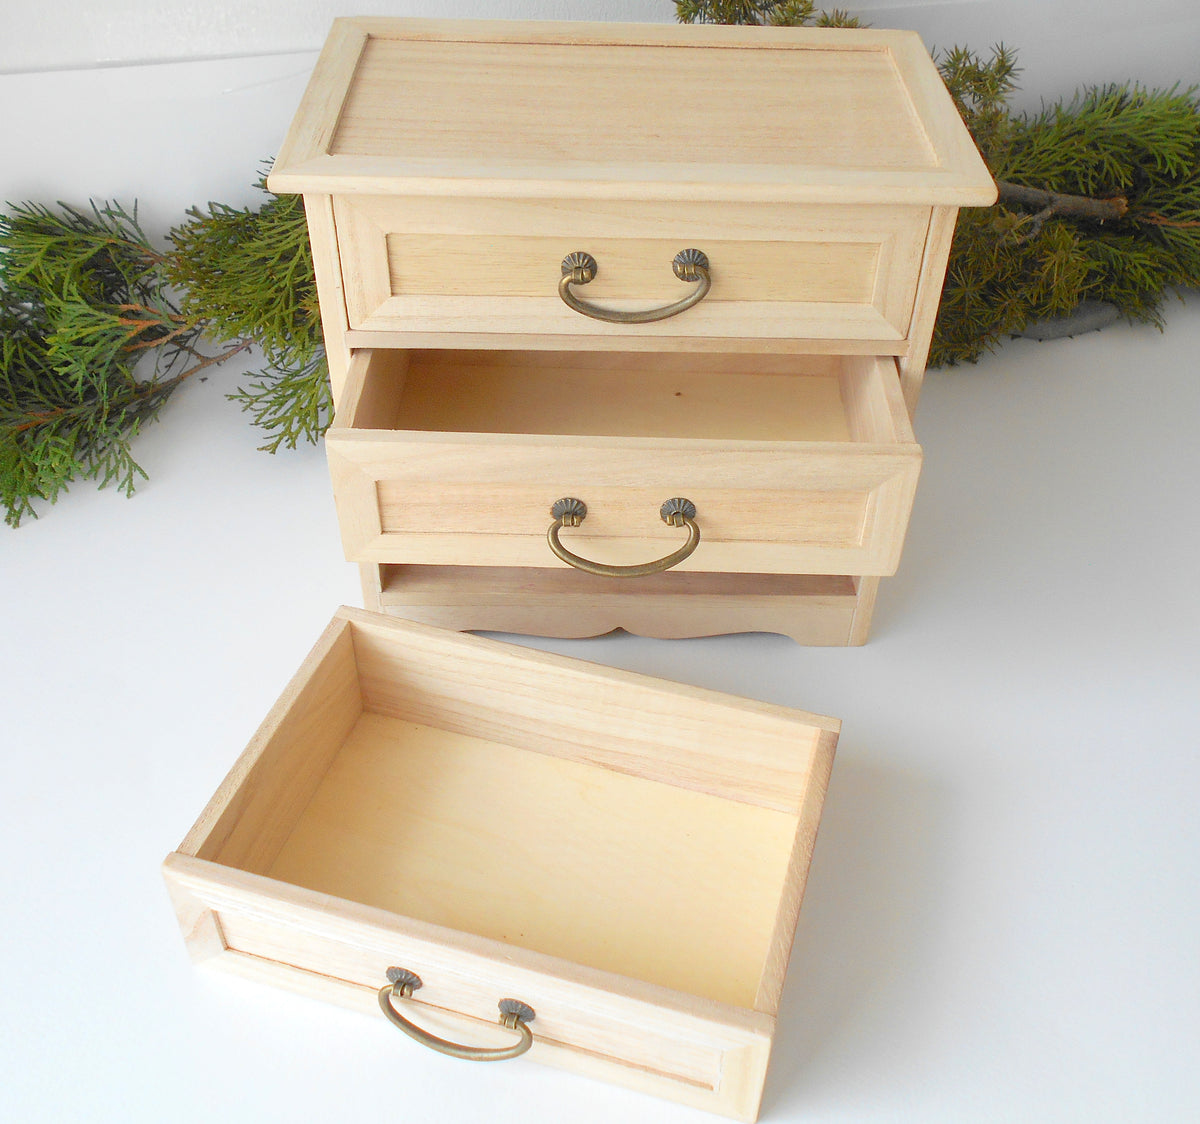 This wooden box with 3 drawers is made of bamboo wood. It has metal pulls with a vintage bronze color. The surface of the box is smooth and refined with sanding paper. The color of the box is plain pinewood color.&amp;nbsp;